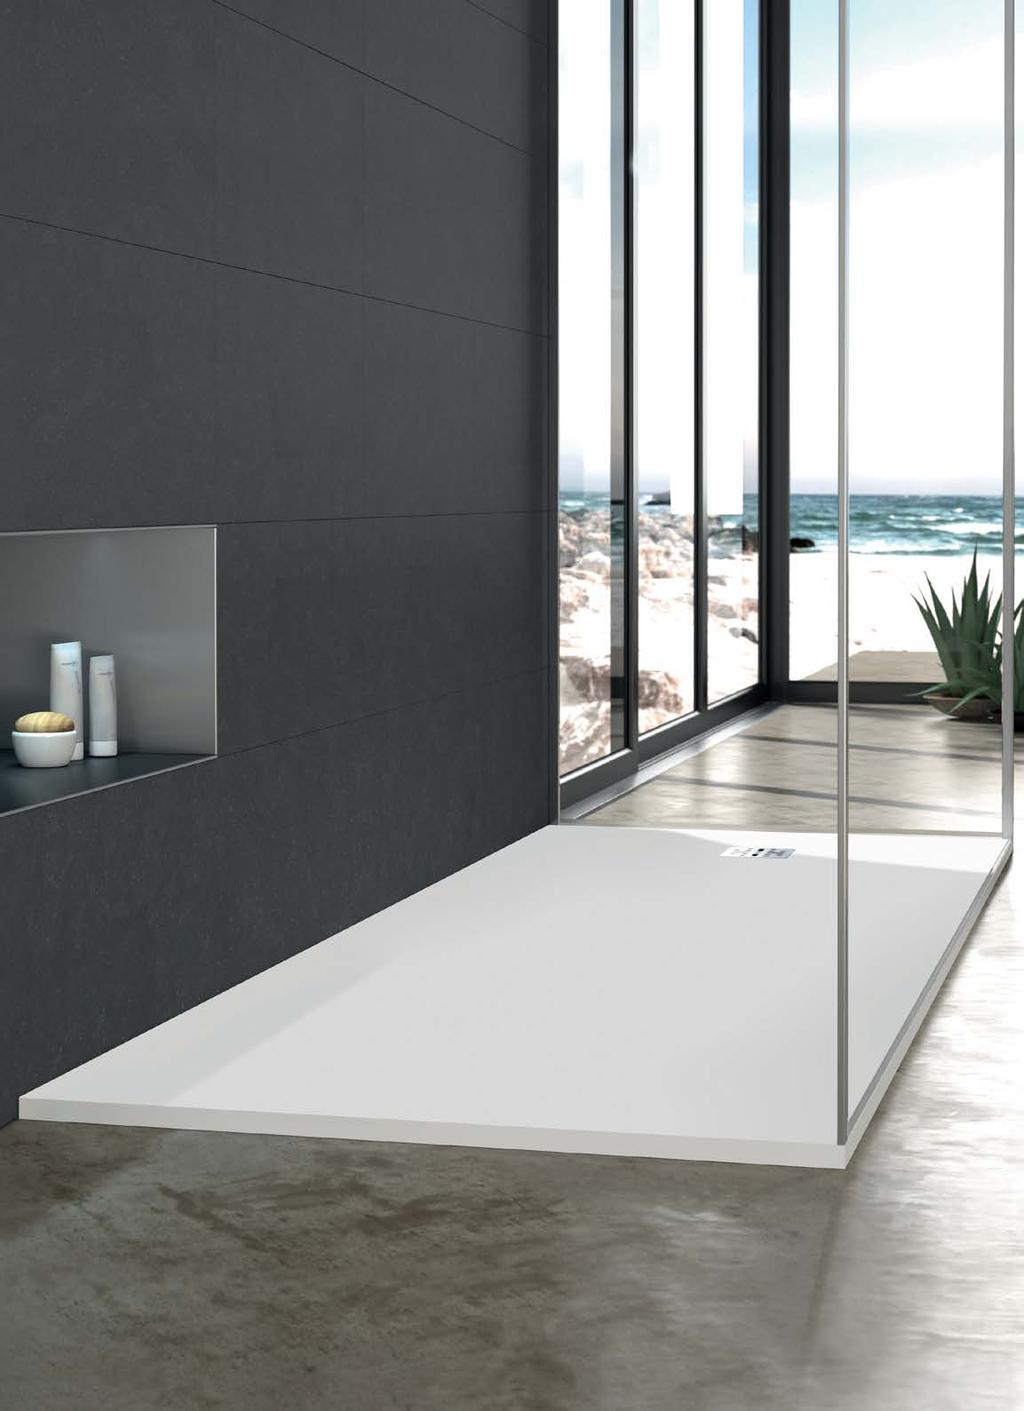 new blu stone shower base Precision engineered with a super slim 1¼" threshold, the new ultra-low shower receptor is made from Blu Bathworks signature eco-friendly blu stone material.